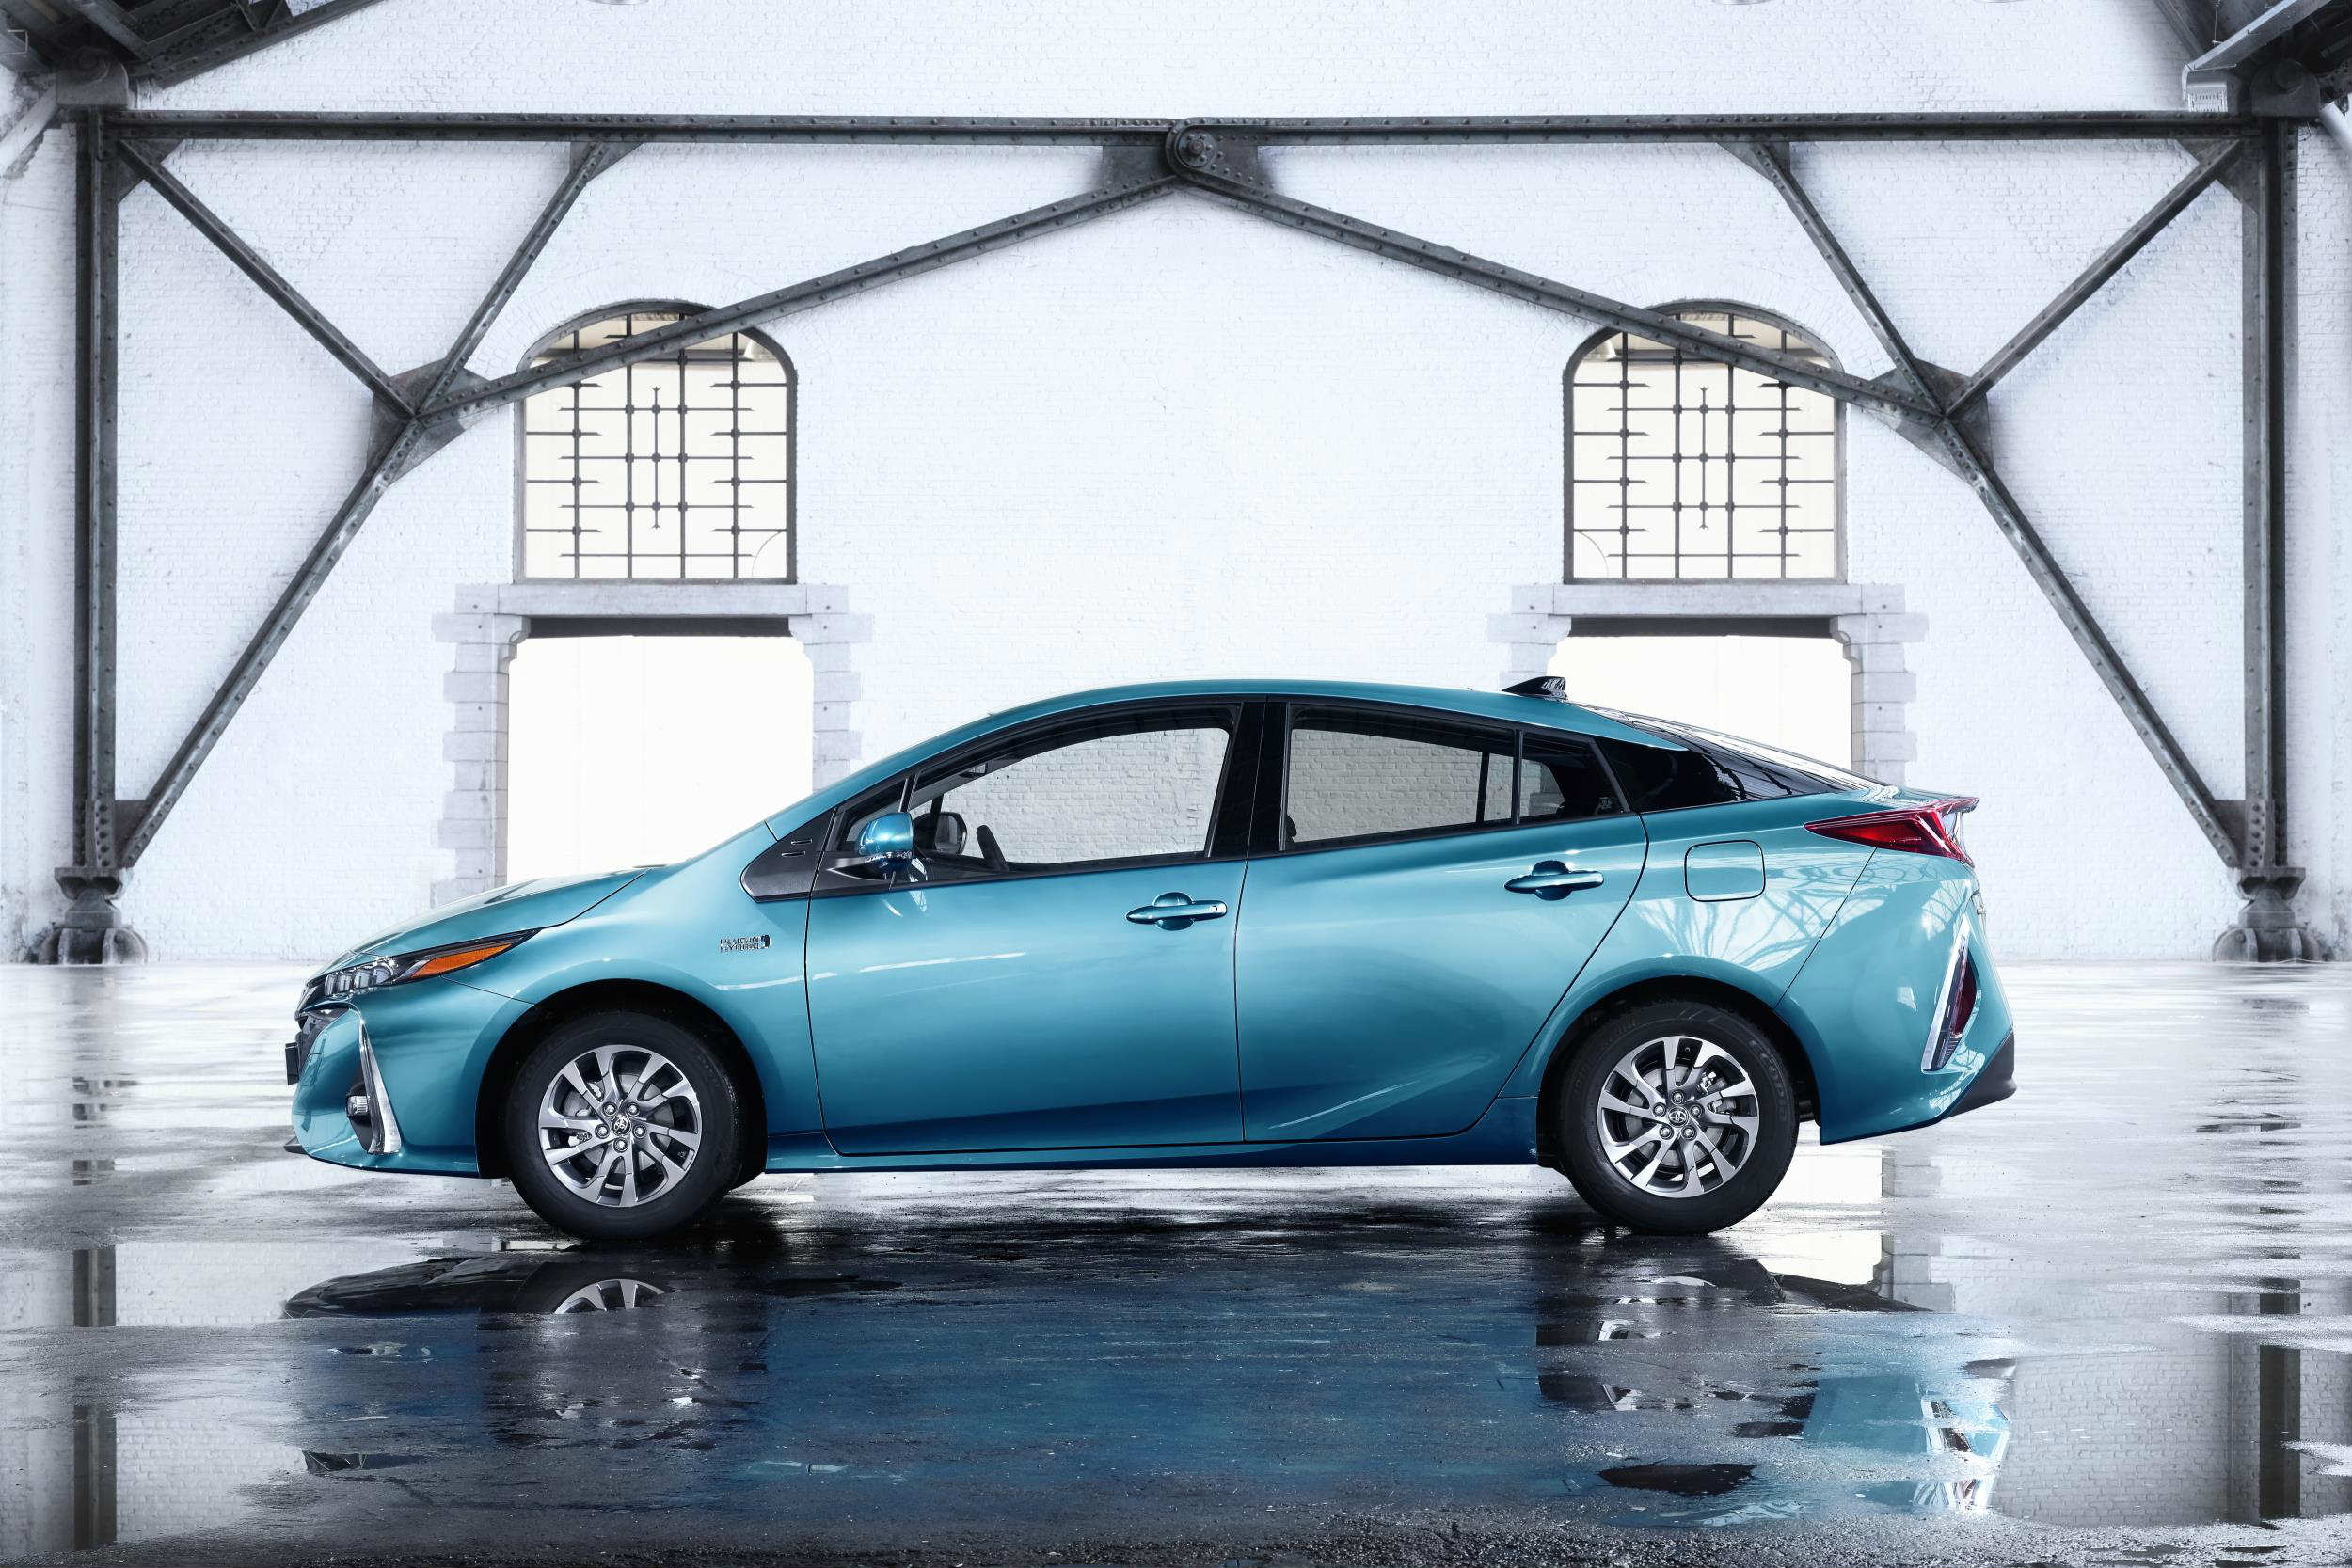 Toyota Prius is the most reliable used car in the 2017 Driver Power survey